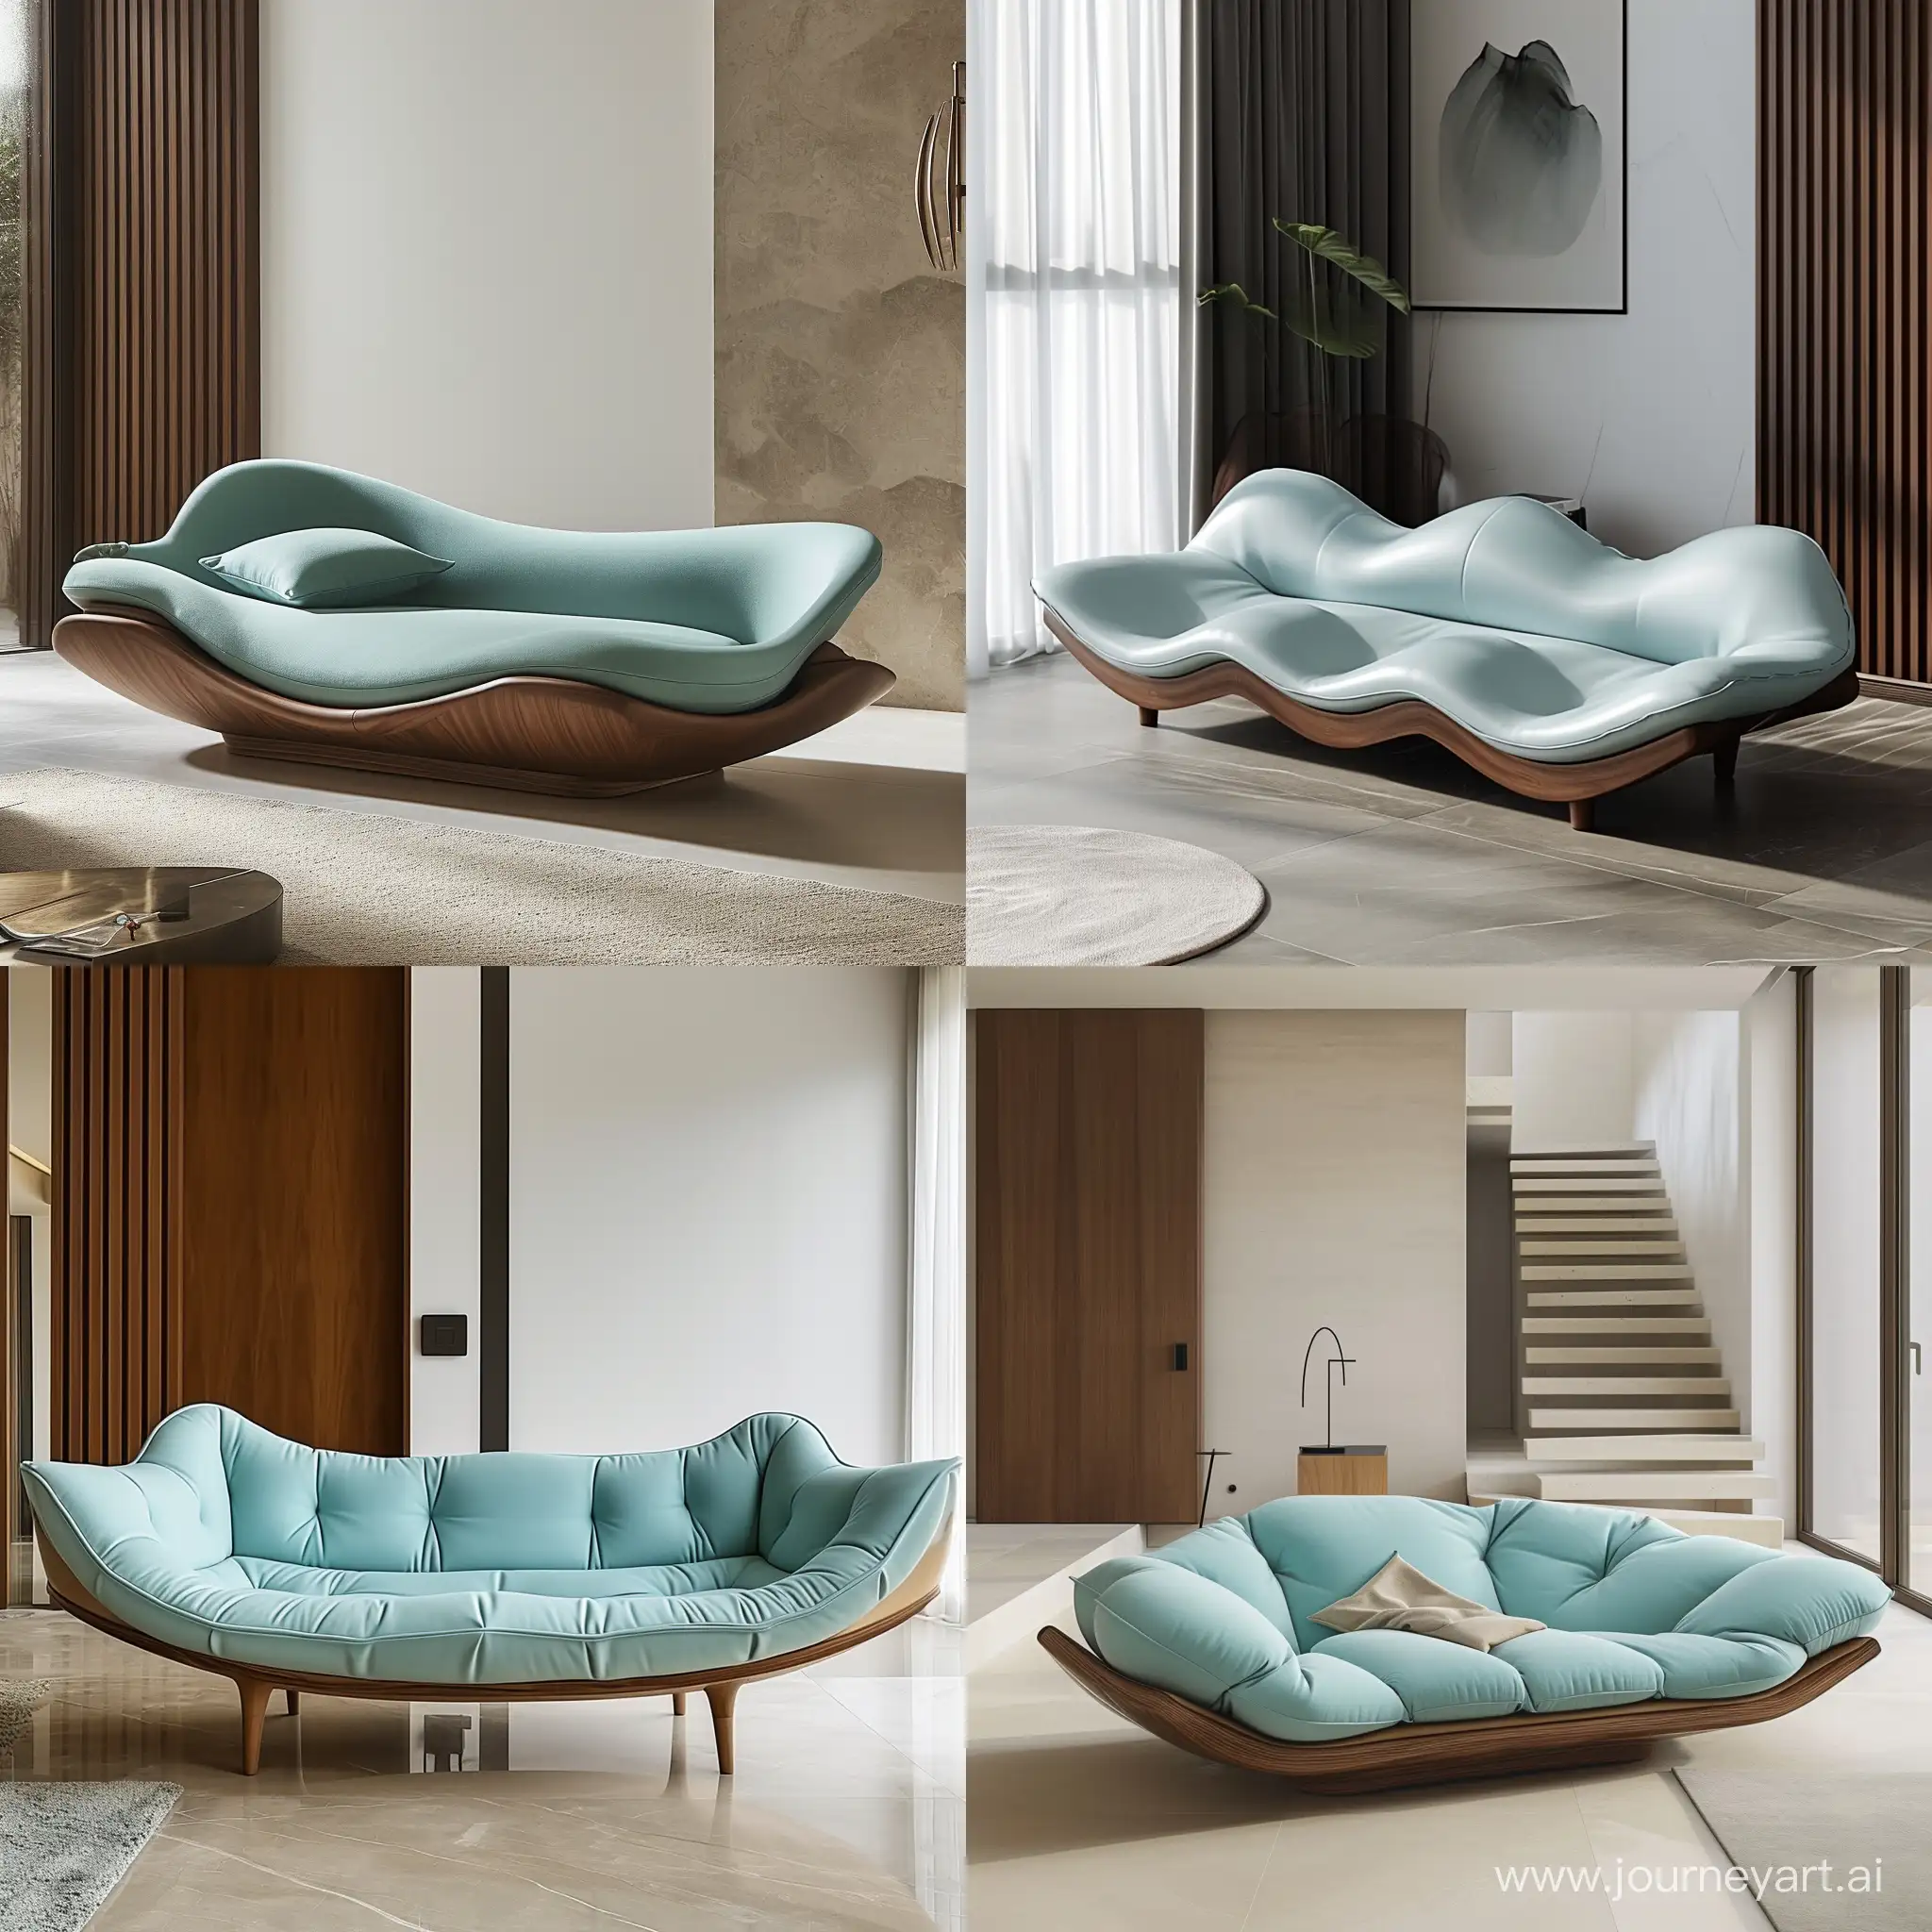 Desire to design a comfortable sofa:
Type of sofa: comfortable, modern and minimal
Style: Zaha Hadid design style
Size: three people with a length of at least 2.3 meters
Coil material: walnut wood
Base material: walnut wood
Cover material: Yeast cloth
Cover color: Tiffany blue
Sole material: cold foam
Floor and seat design: integrated and smooth, suitable for people with back problems
Handles: short with opening mechanism.
Goal: very high comfort. Not being bothered while sleeping on the sofa
Environment: a modern house with luxury and minimal decoration